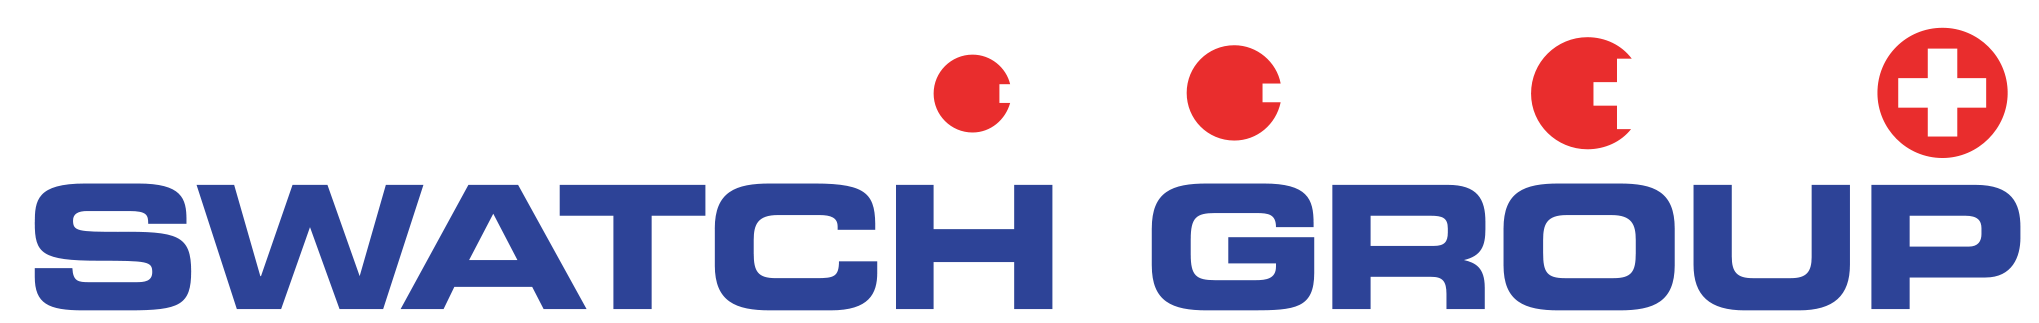 Swatch-Group-Logo-e1555417671269.png